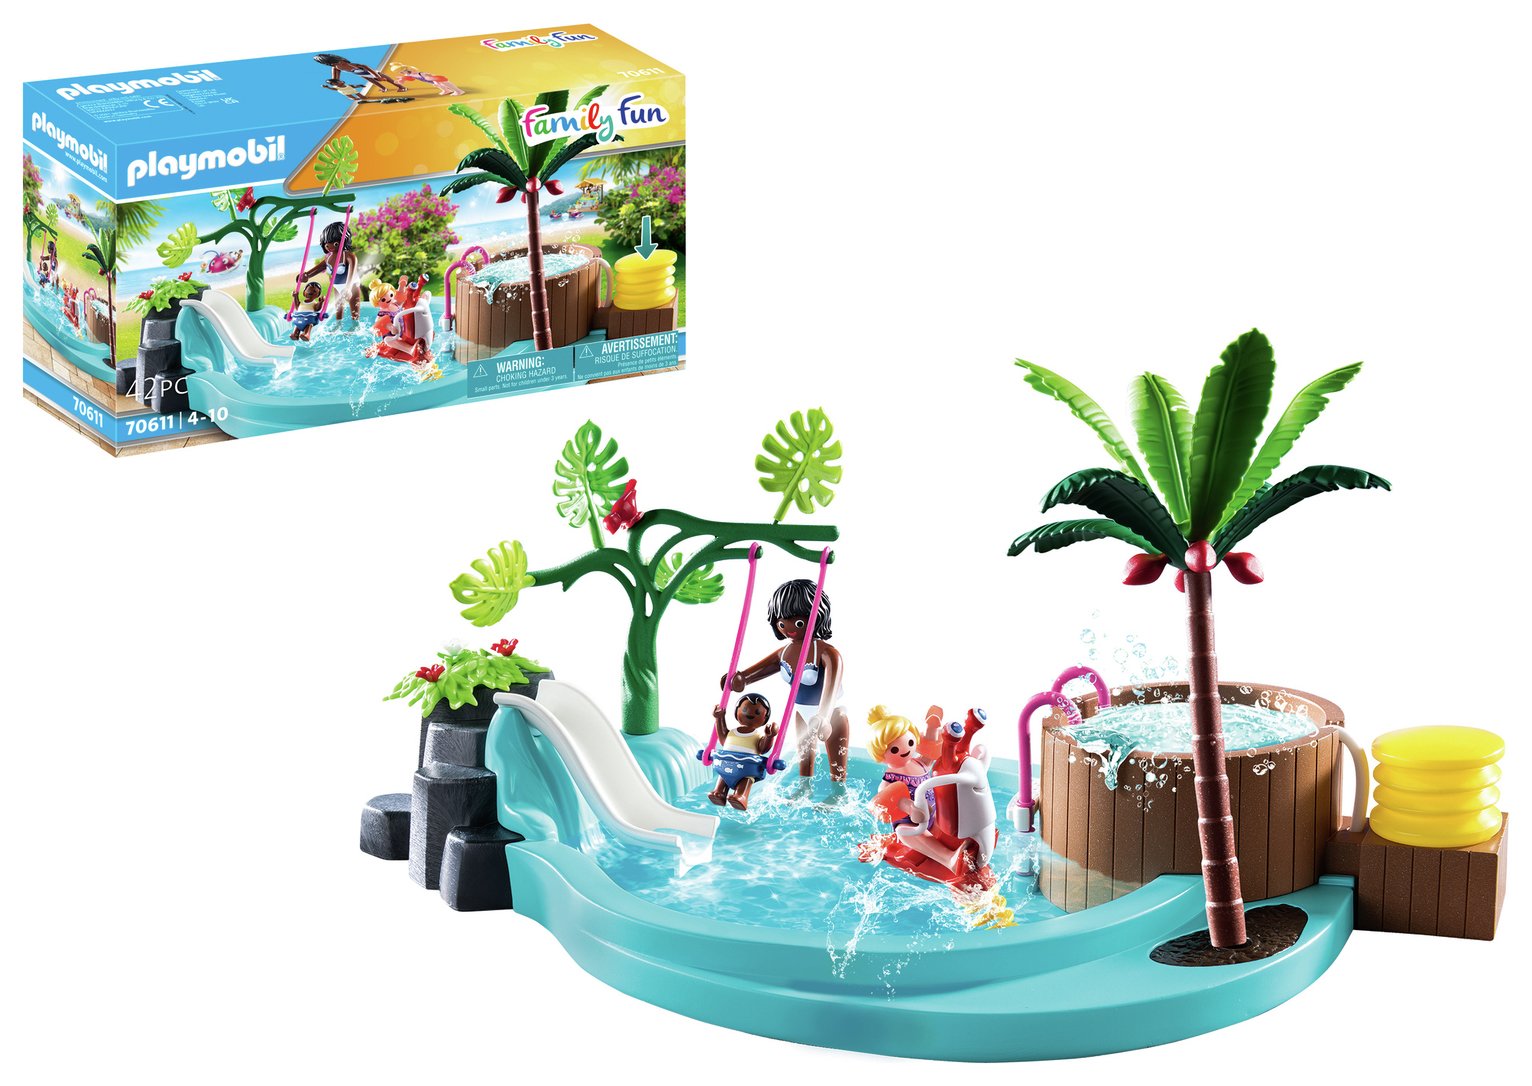 Playmobil 70611 Childrens Pool Playset review